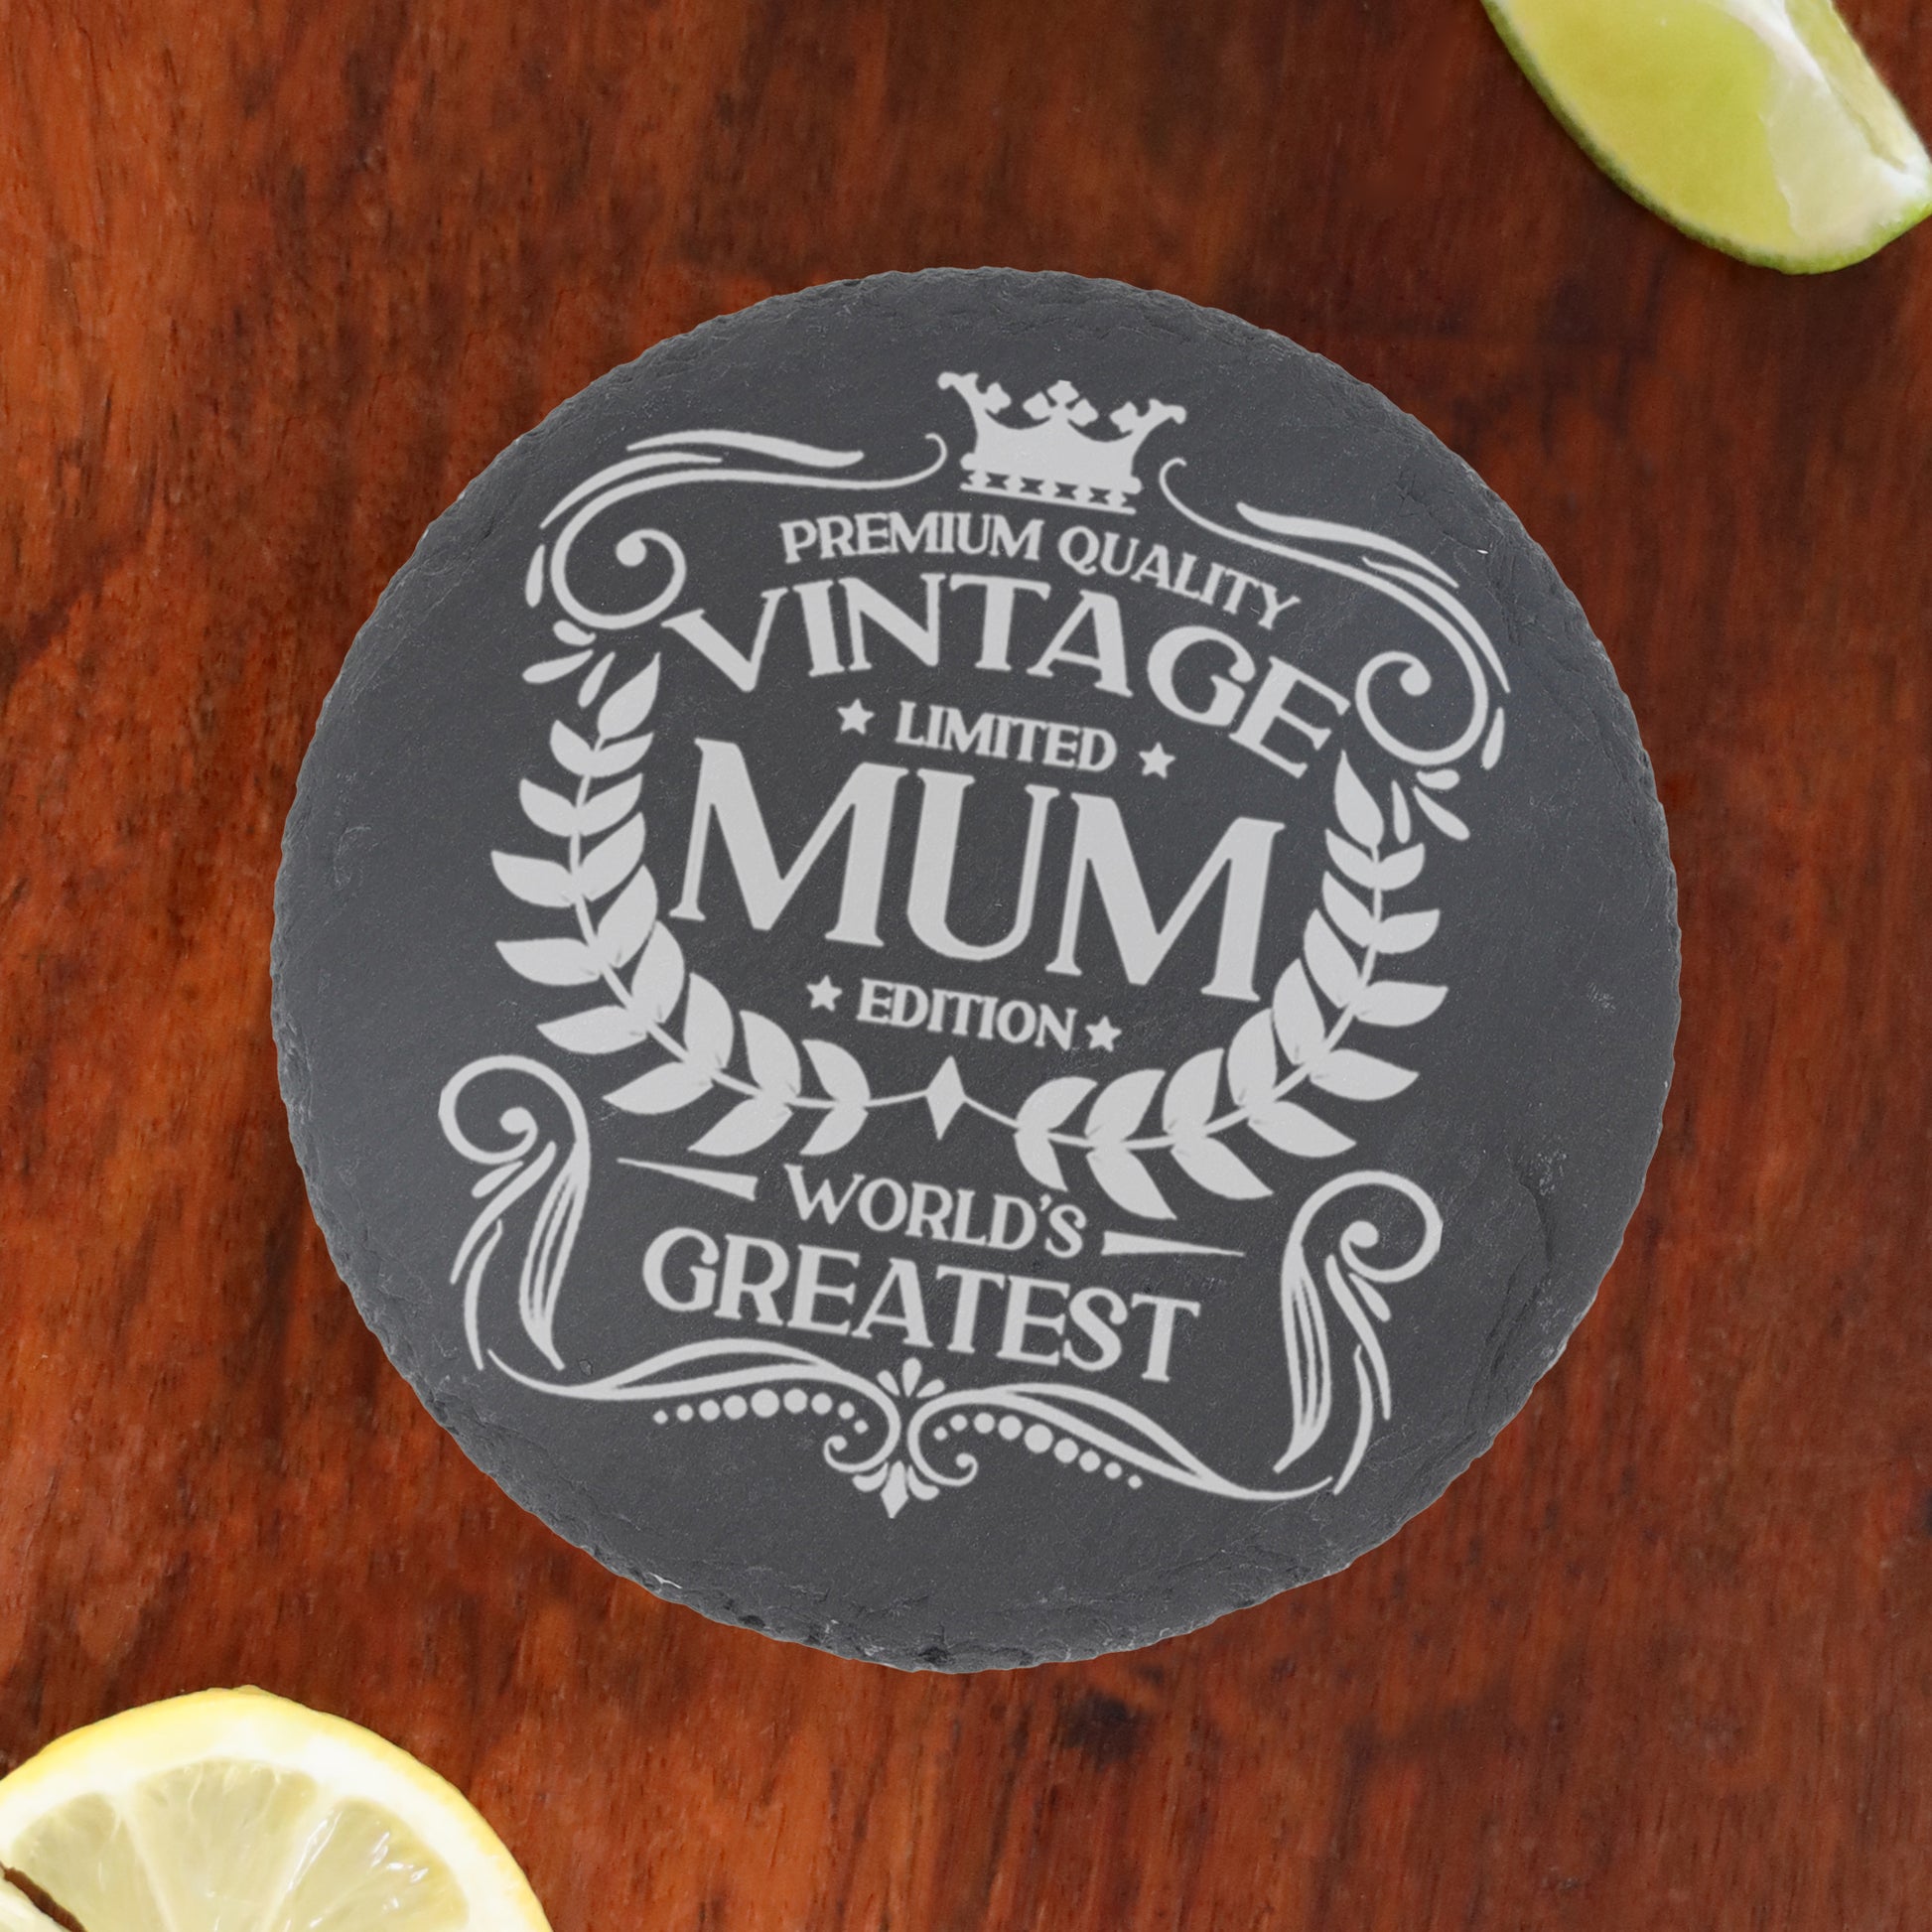 Vintage World's Greatest Mum Engraved Gin Glass Gift  - Always Looking Good -   